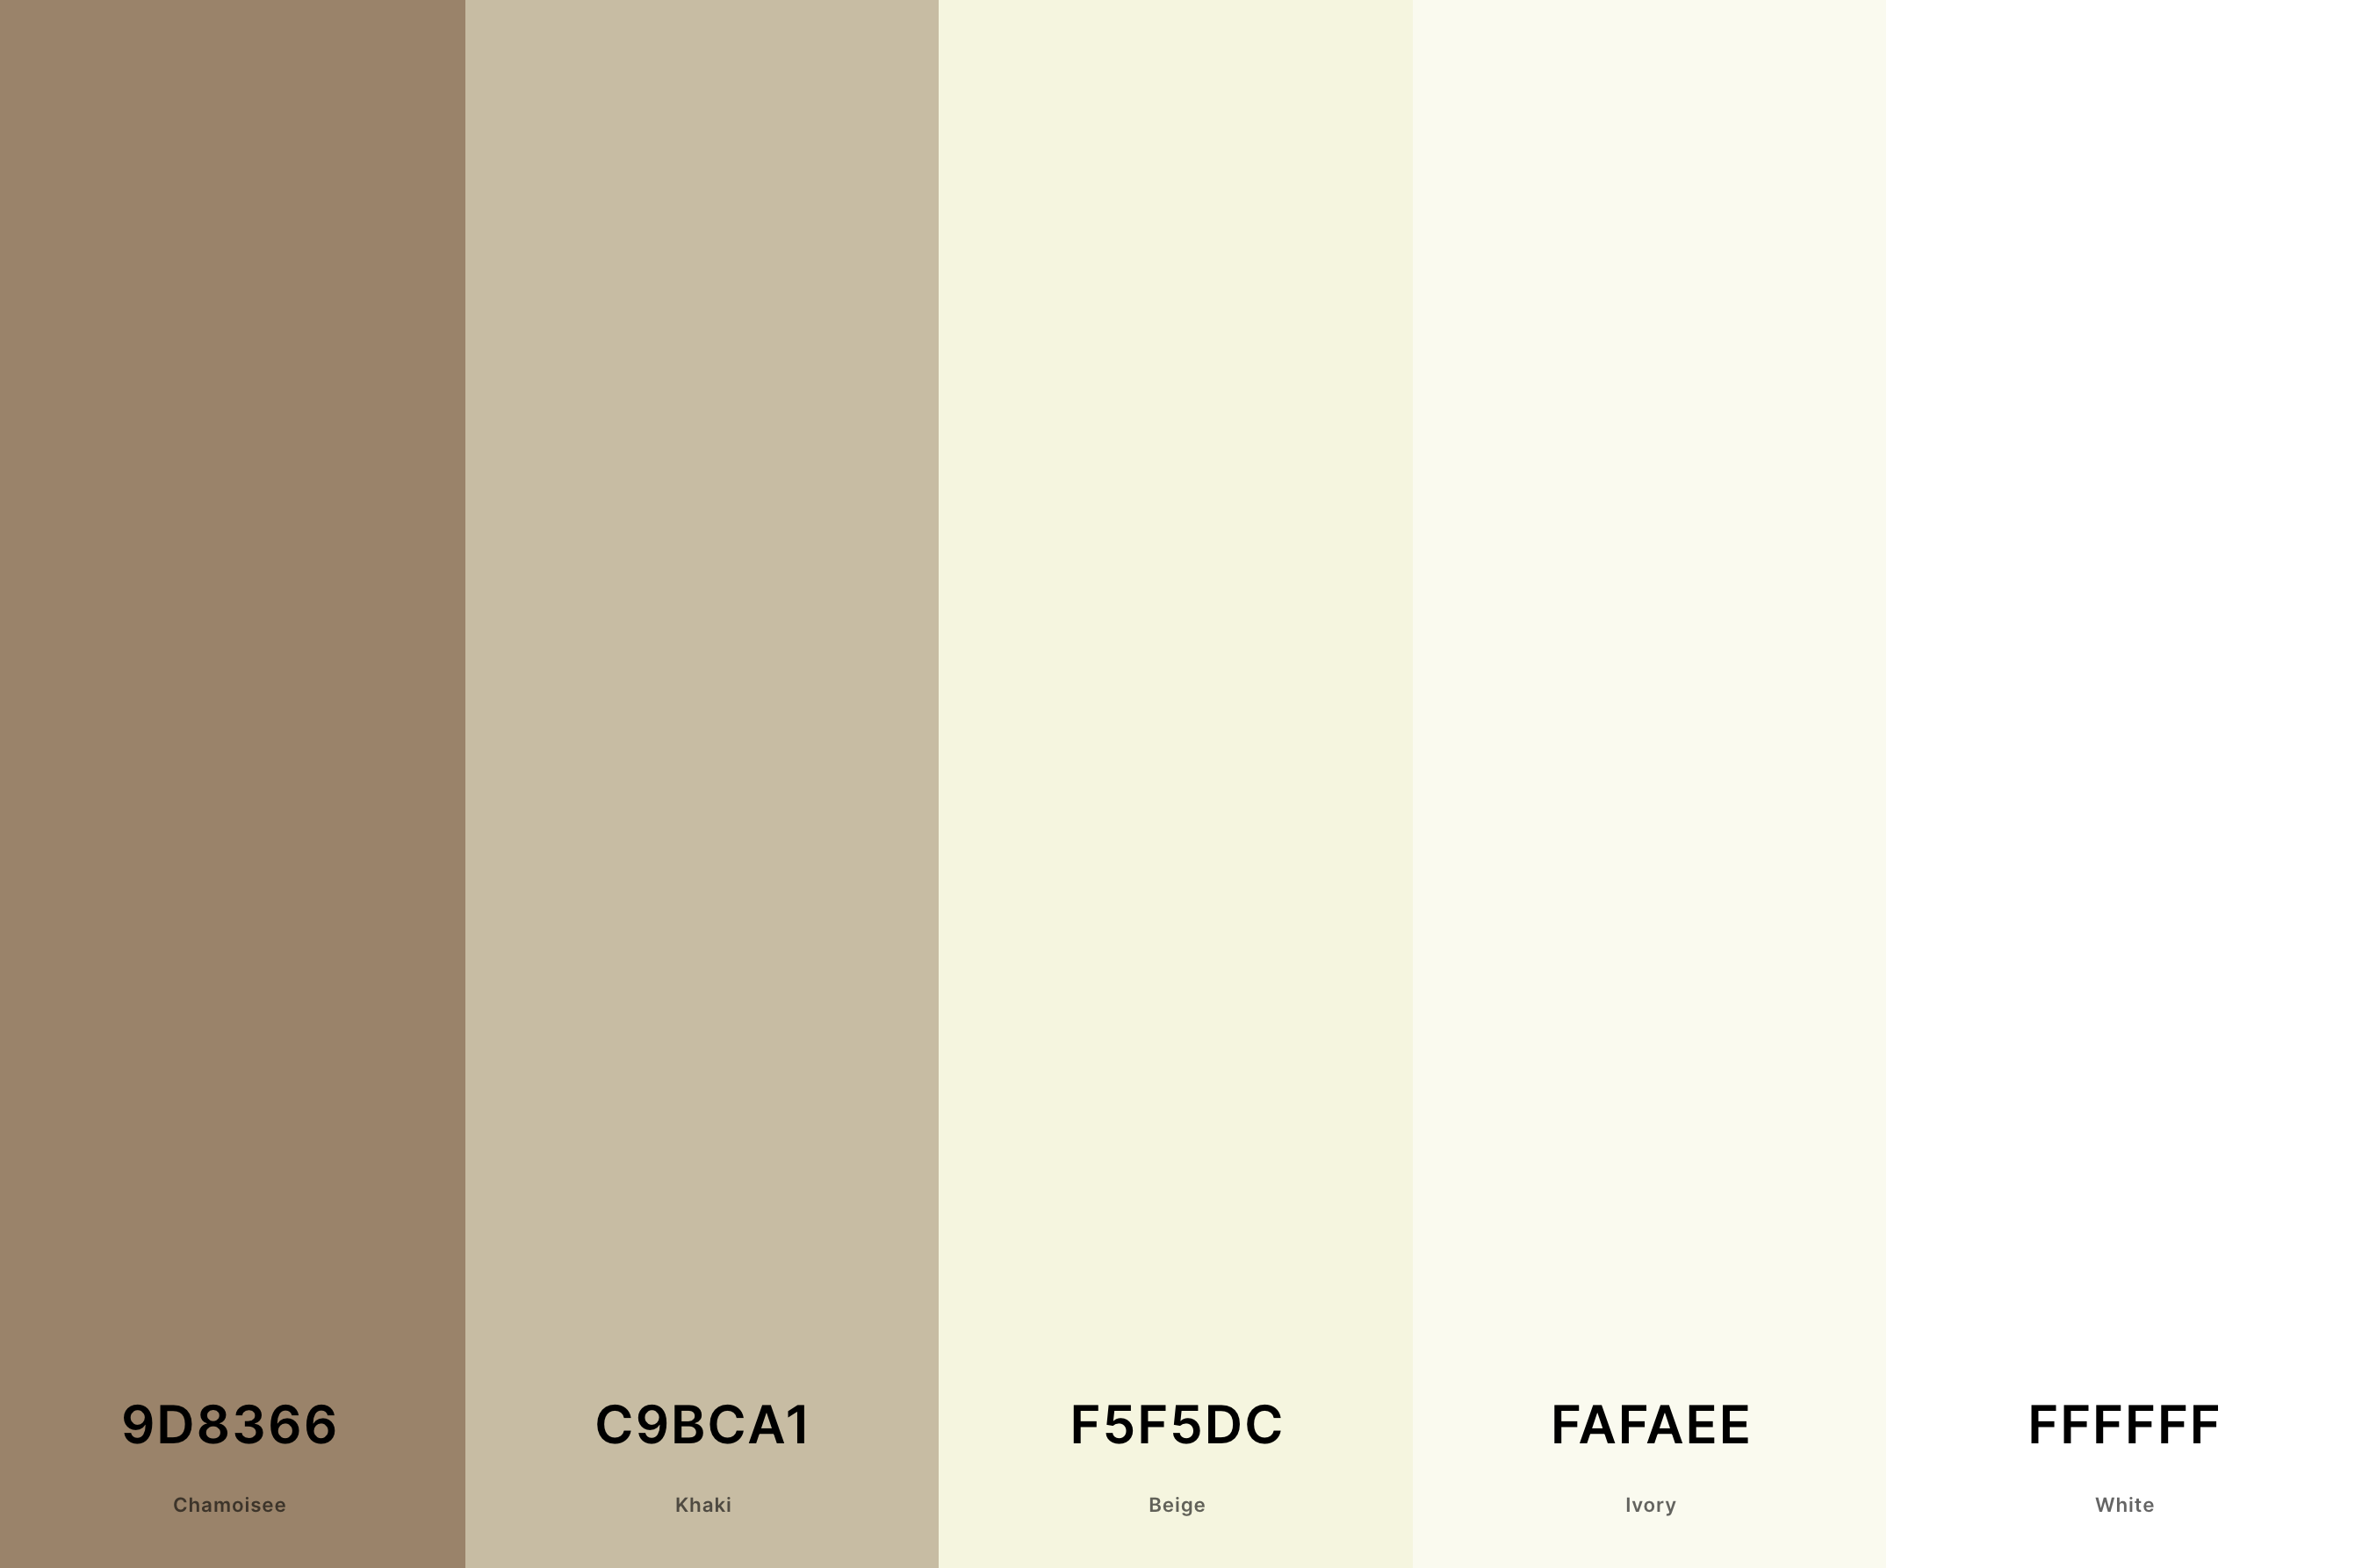 14. Beige And White Color Palette Color Palette with Chamoisee (Hex #9D8366) + Khaki (Hex #C9BCA1) + Beige (Hex #F5F5DC) + Ivory (Hex #FAFAEE) + White (Hex #FFFFFF) Color Palette with Hex Codes